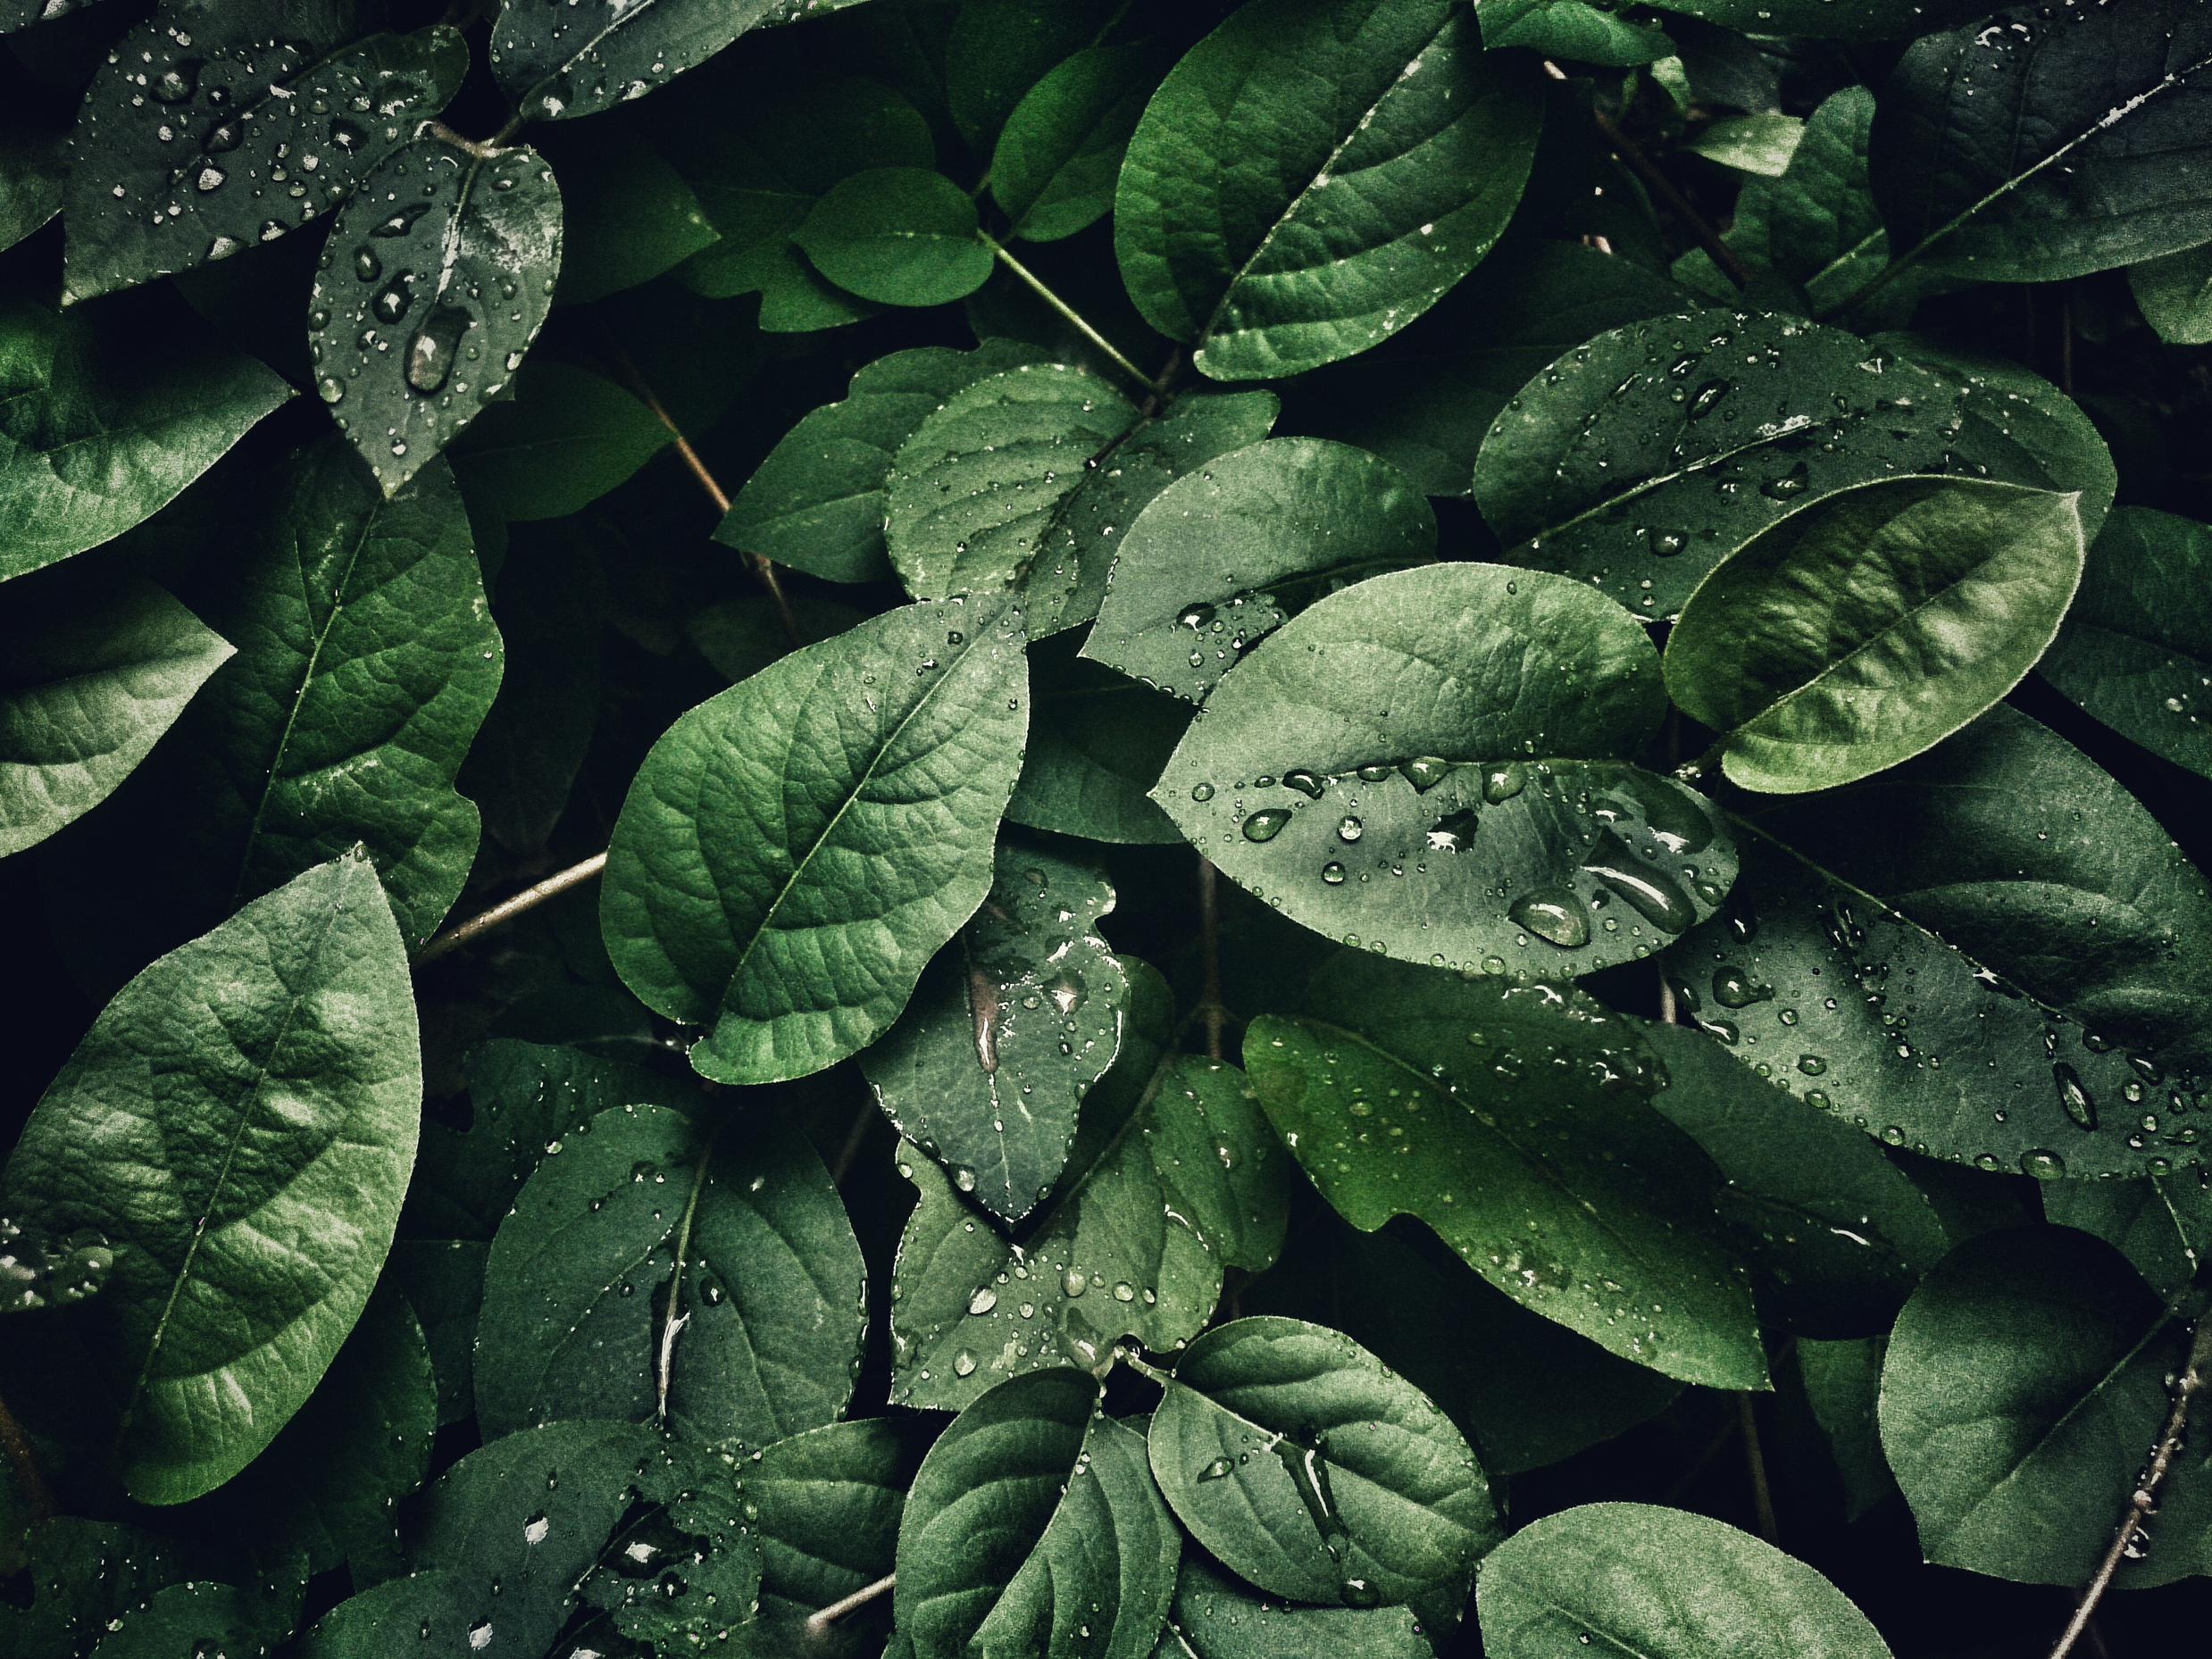 Close-Up Photography of Leaves With Droplets